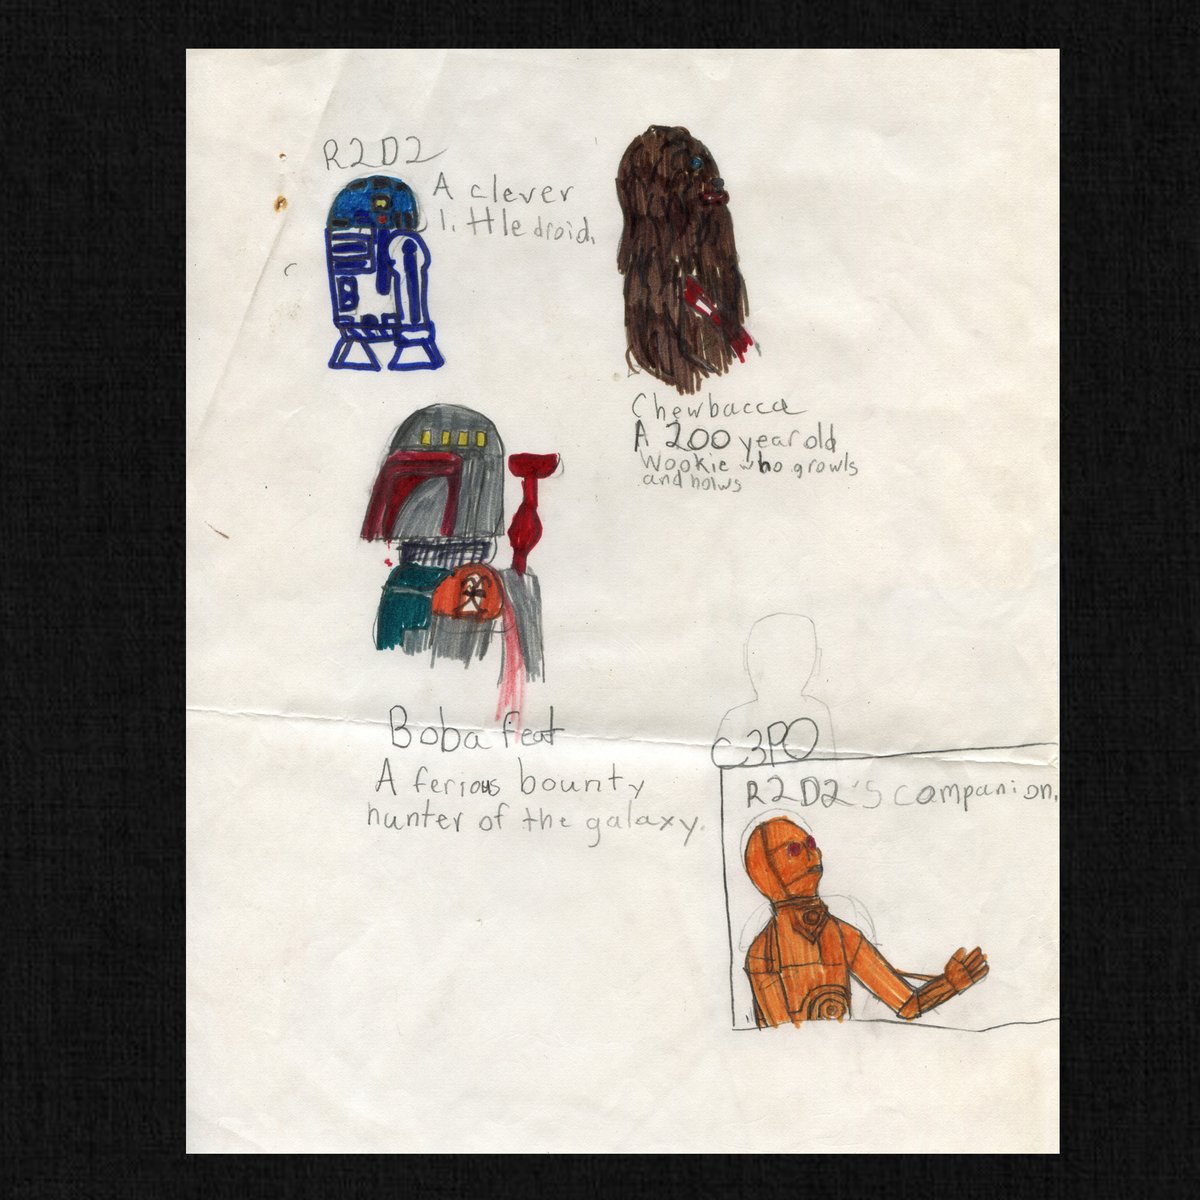 Happy #MaytheFourth If you need some help navigating the many characters in Star Wars, 11-year-old Lee has you covered. Well, at least for The Empire Strikes Back. #starwars #theempirestrikesback #maythefourthbewithyou #happystarwarsday